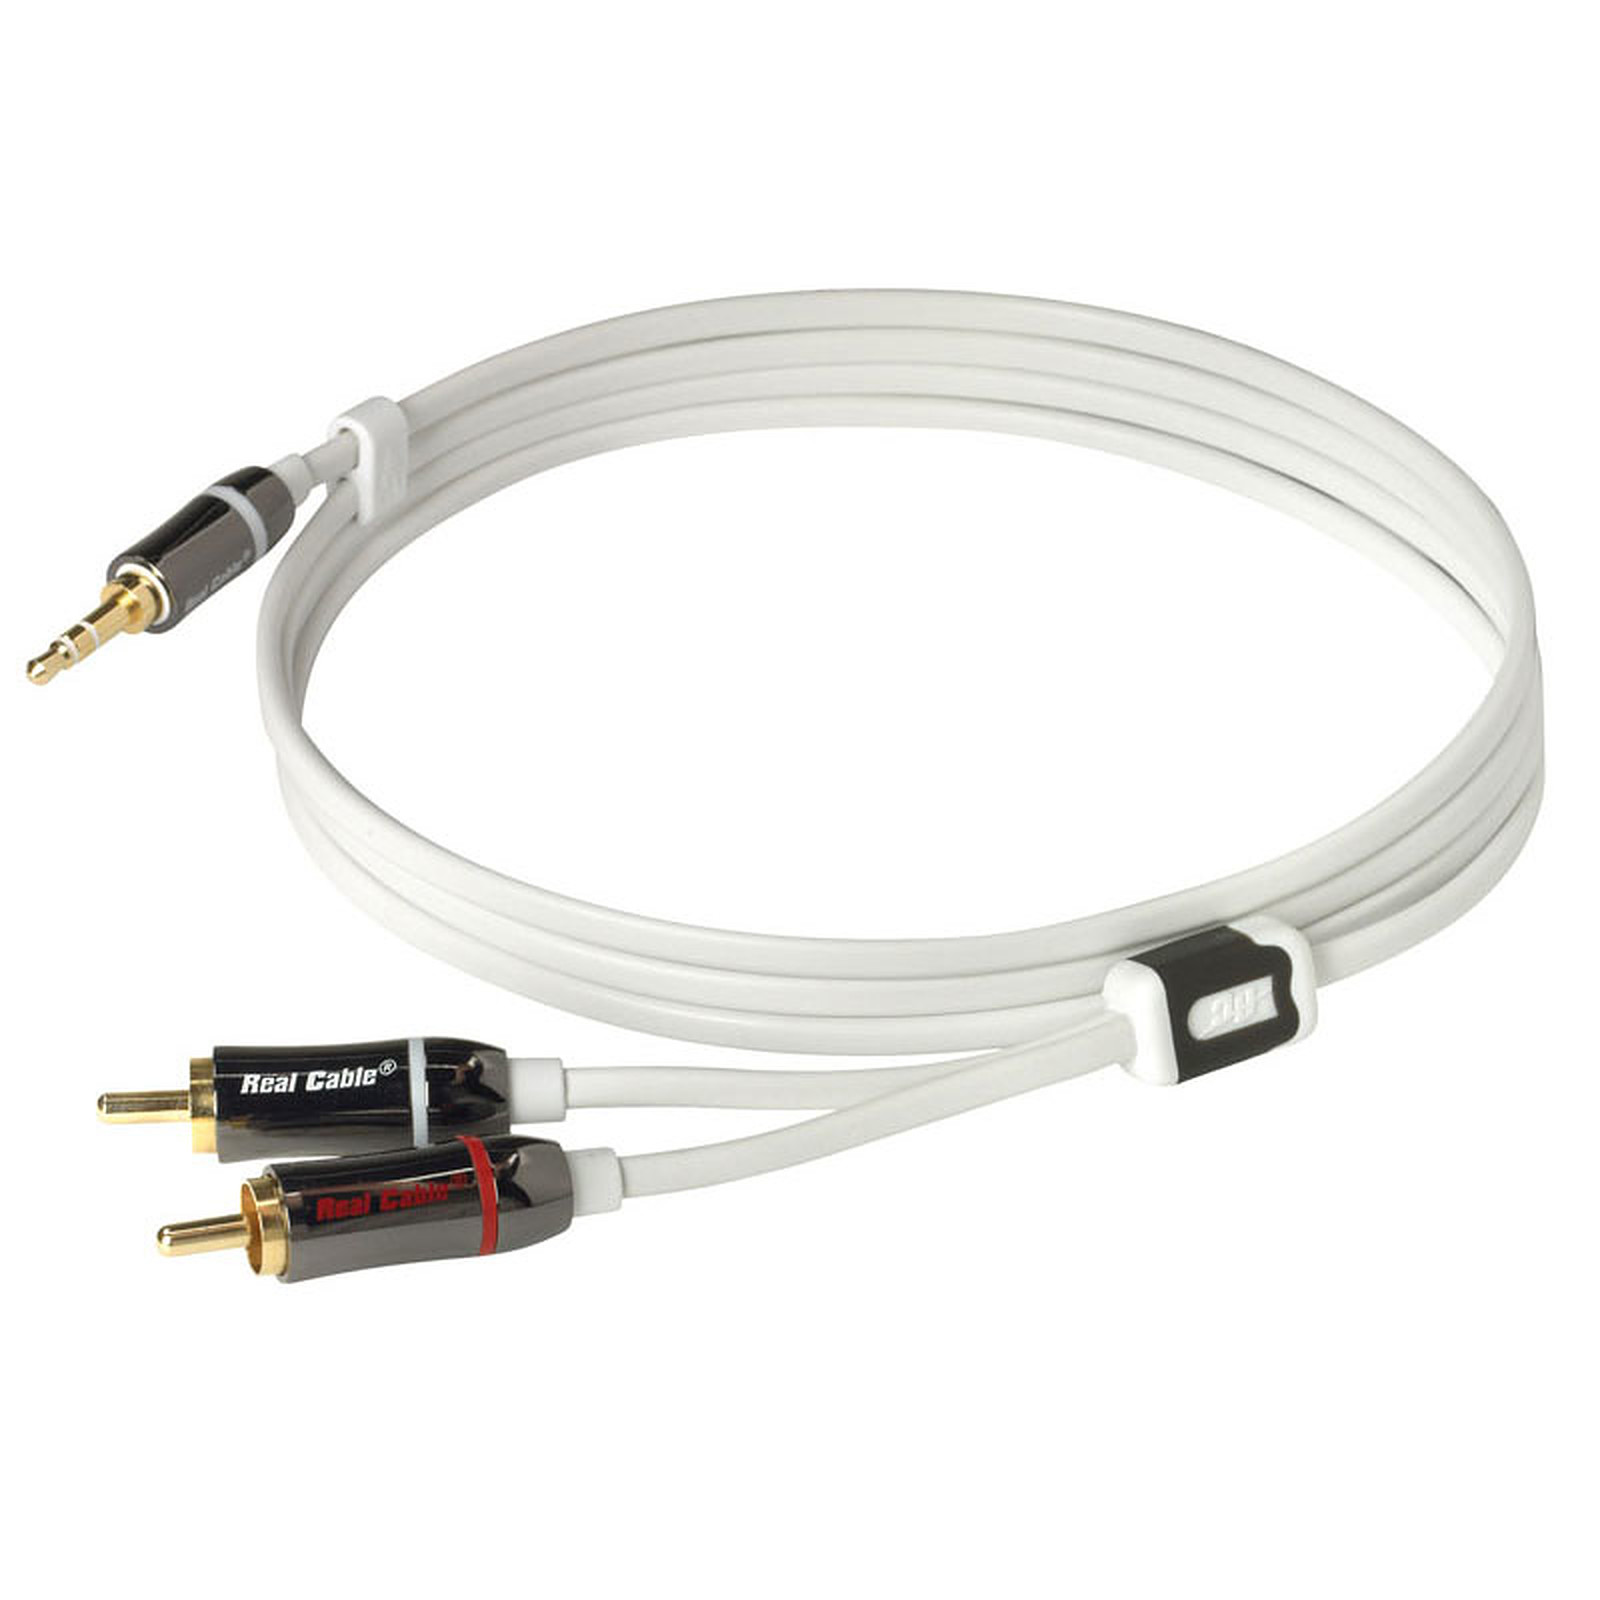 Real Cable iPlug J35M2M 3m - Adaptateur audio Real Cable